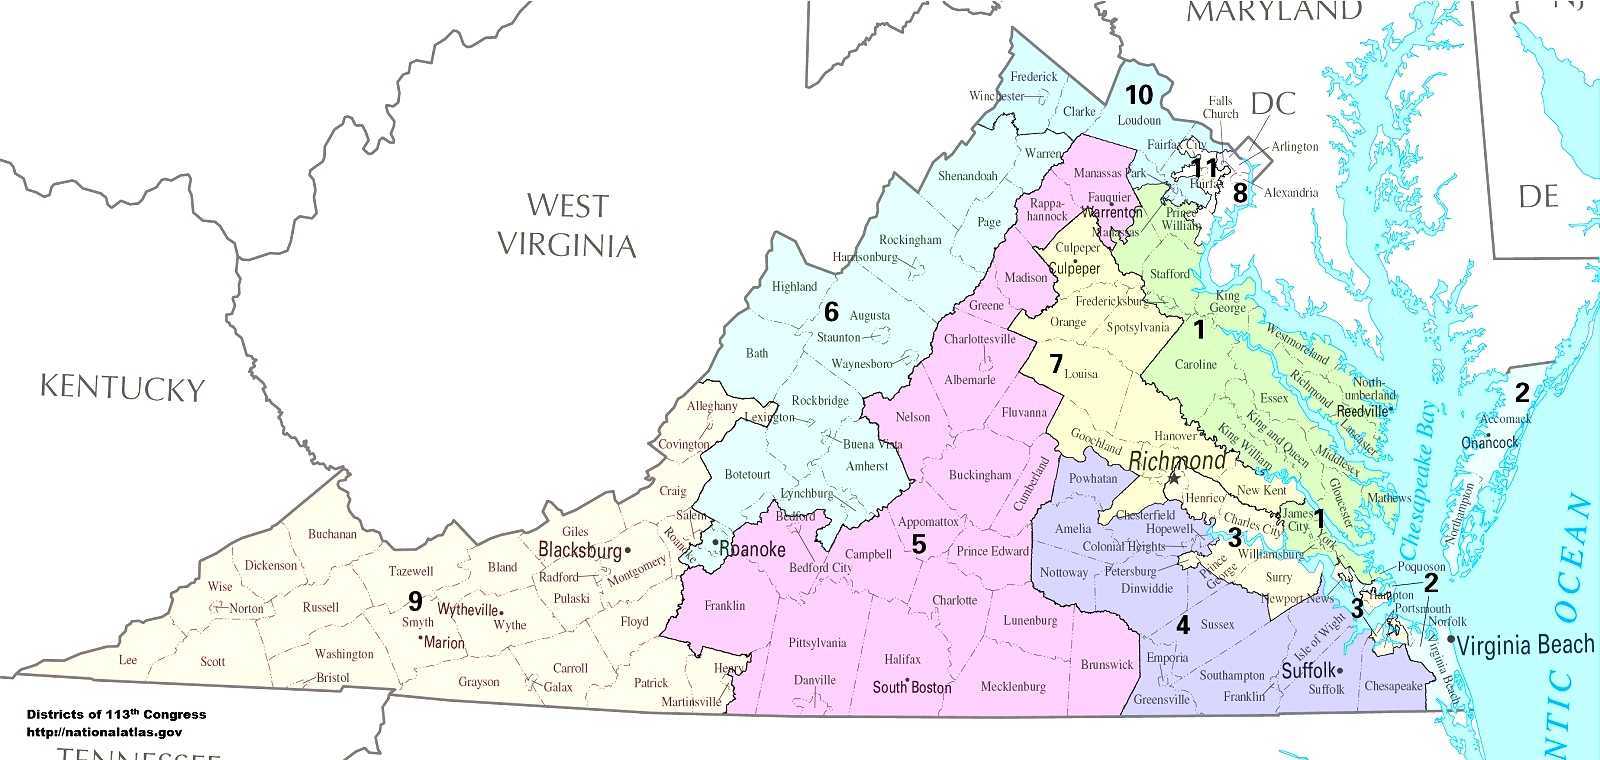 Virginia's 7th congressional district